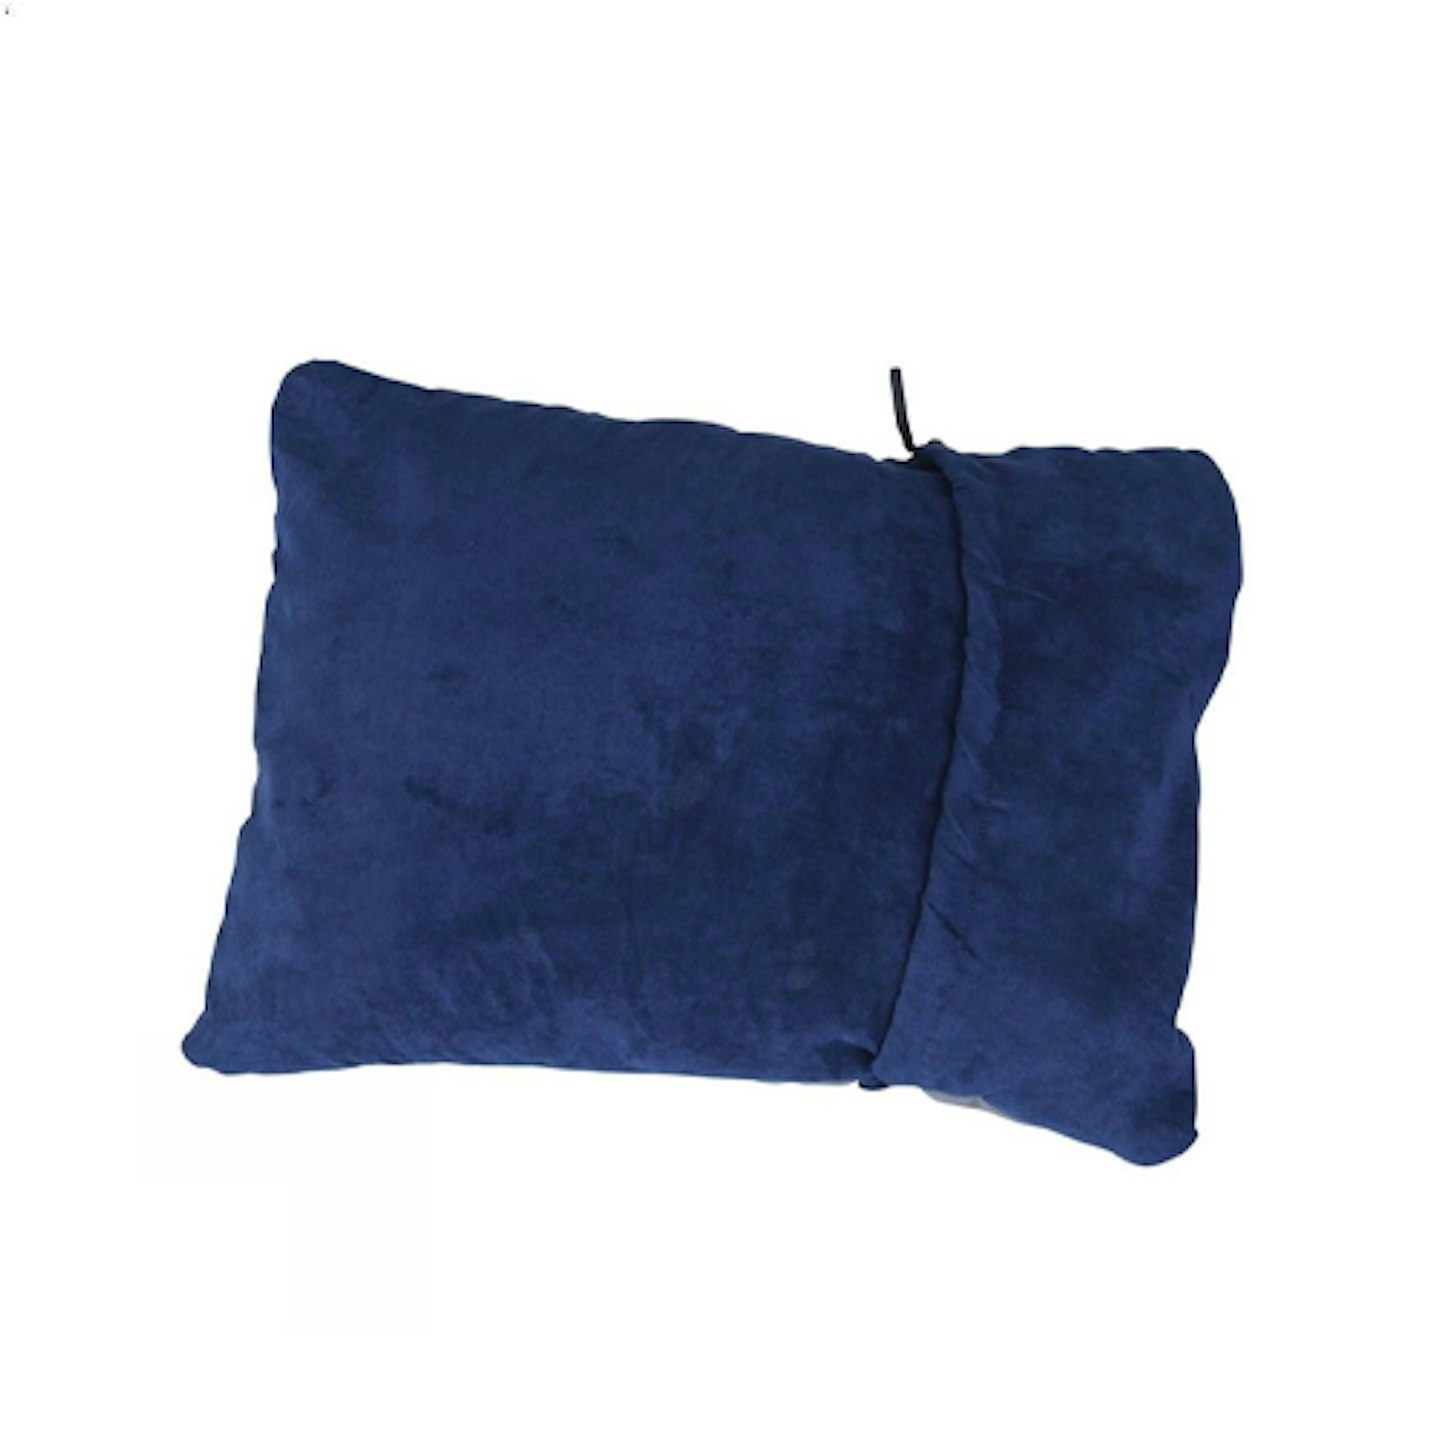 Therm-a-rest Compressible Pillow